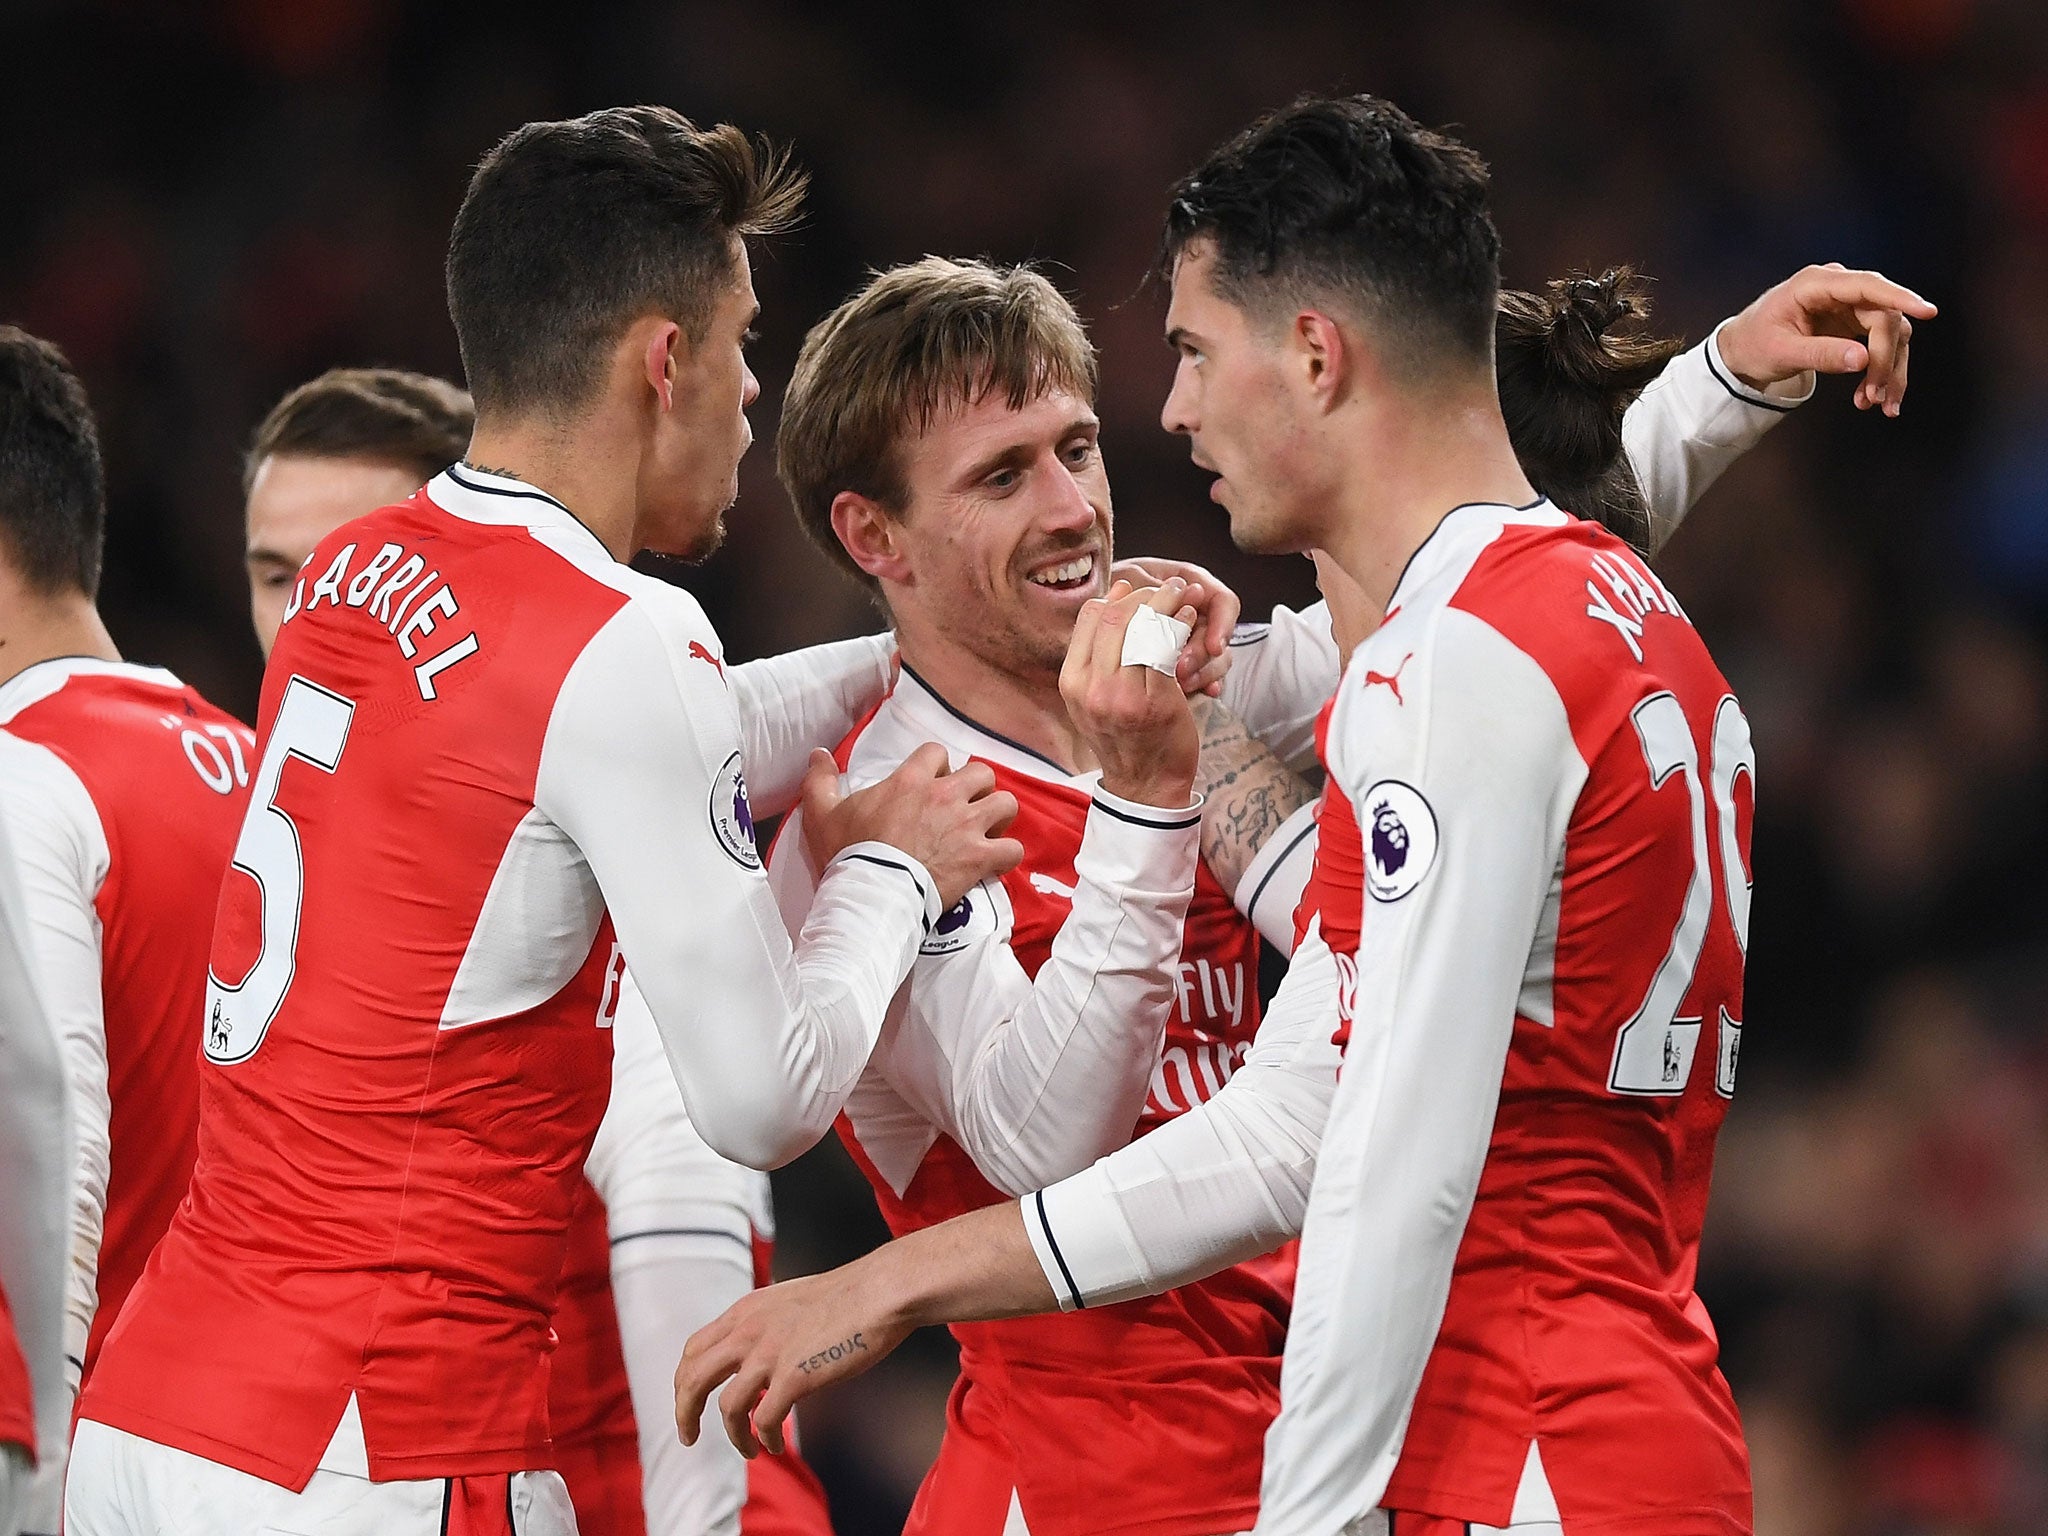 Arsenal's players celebrate following their late winner